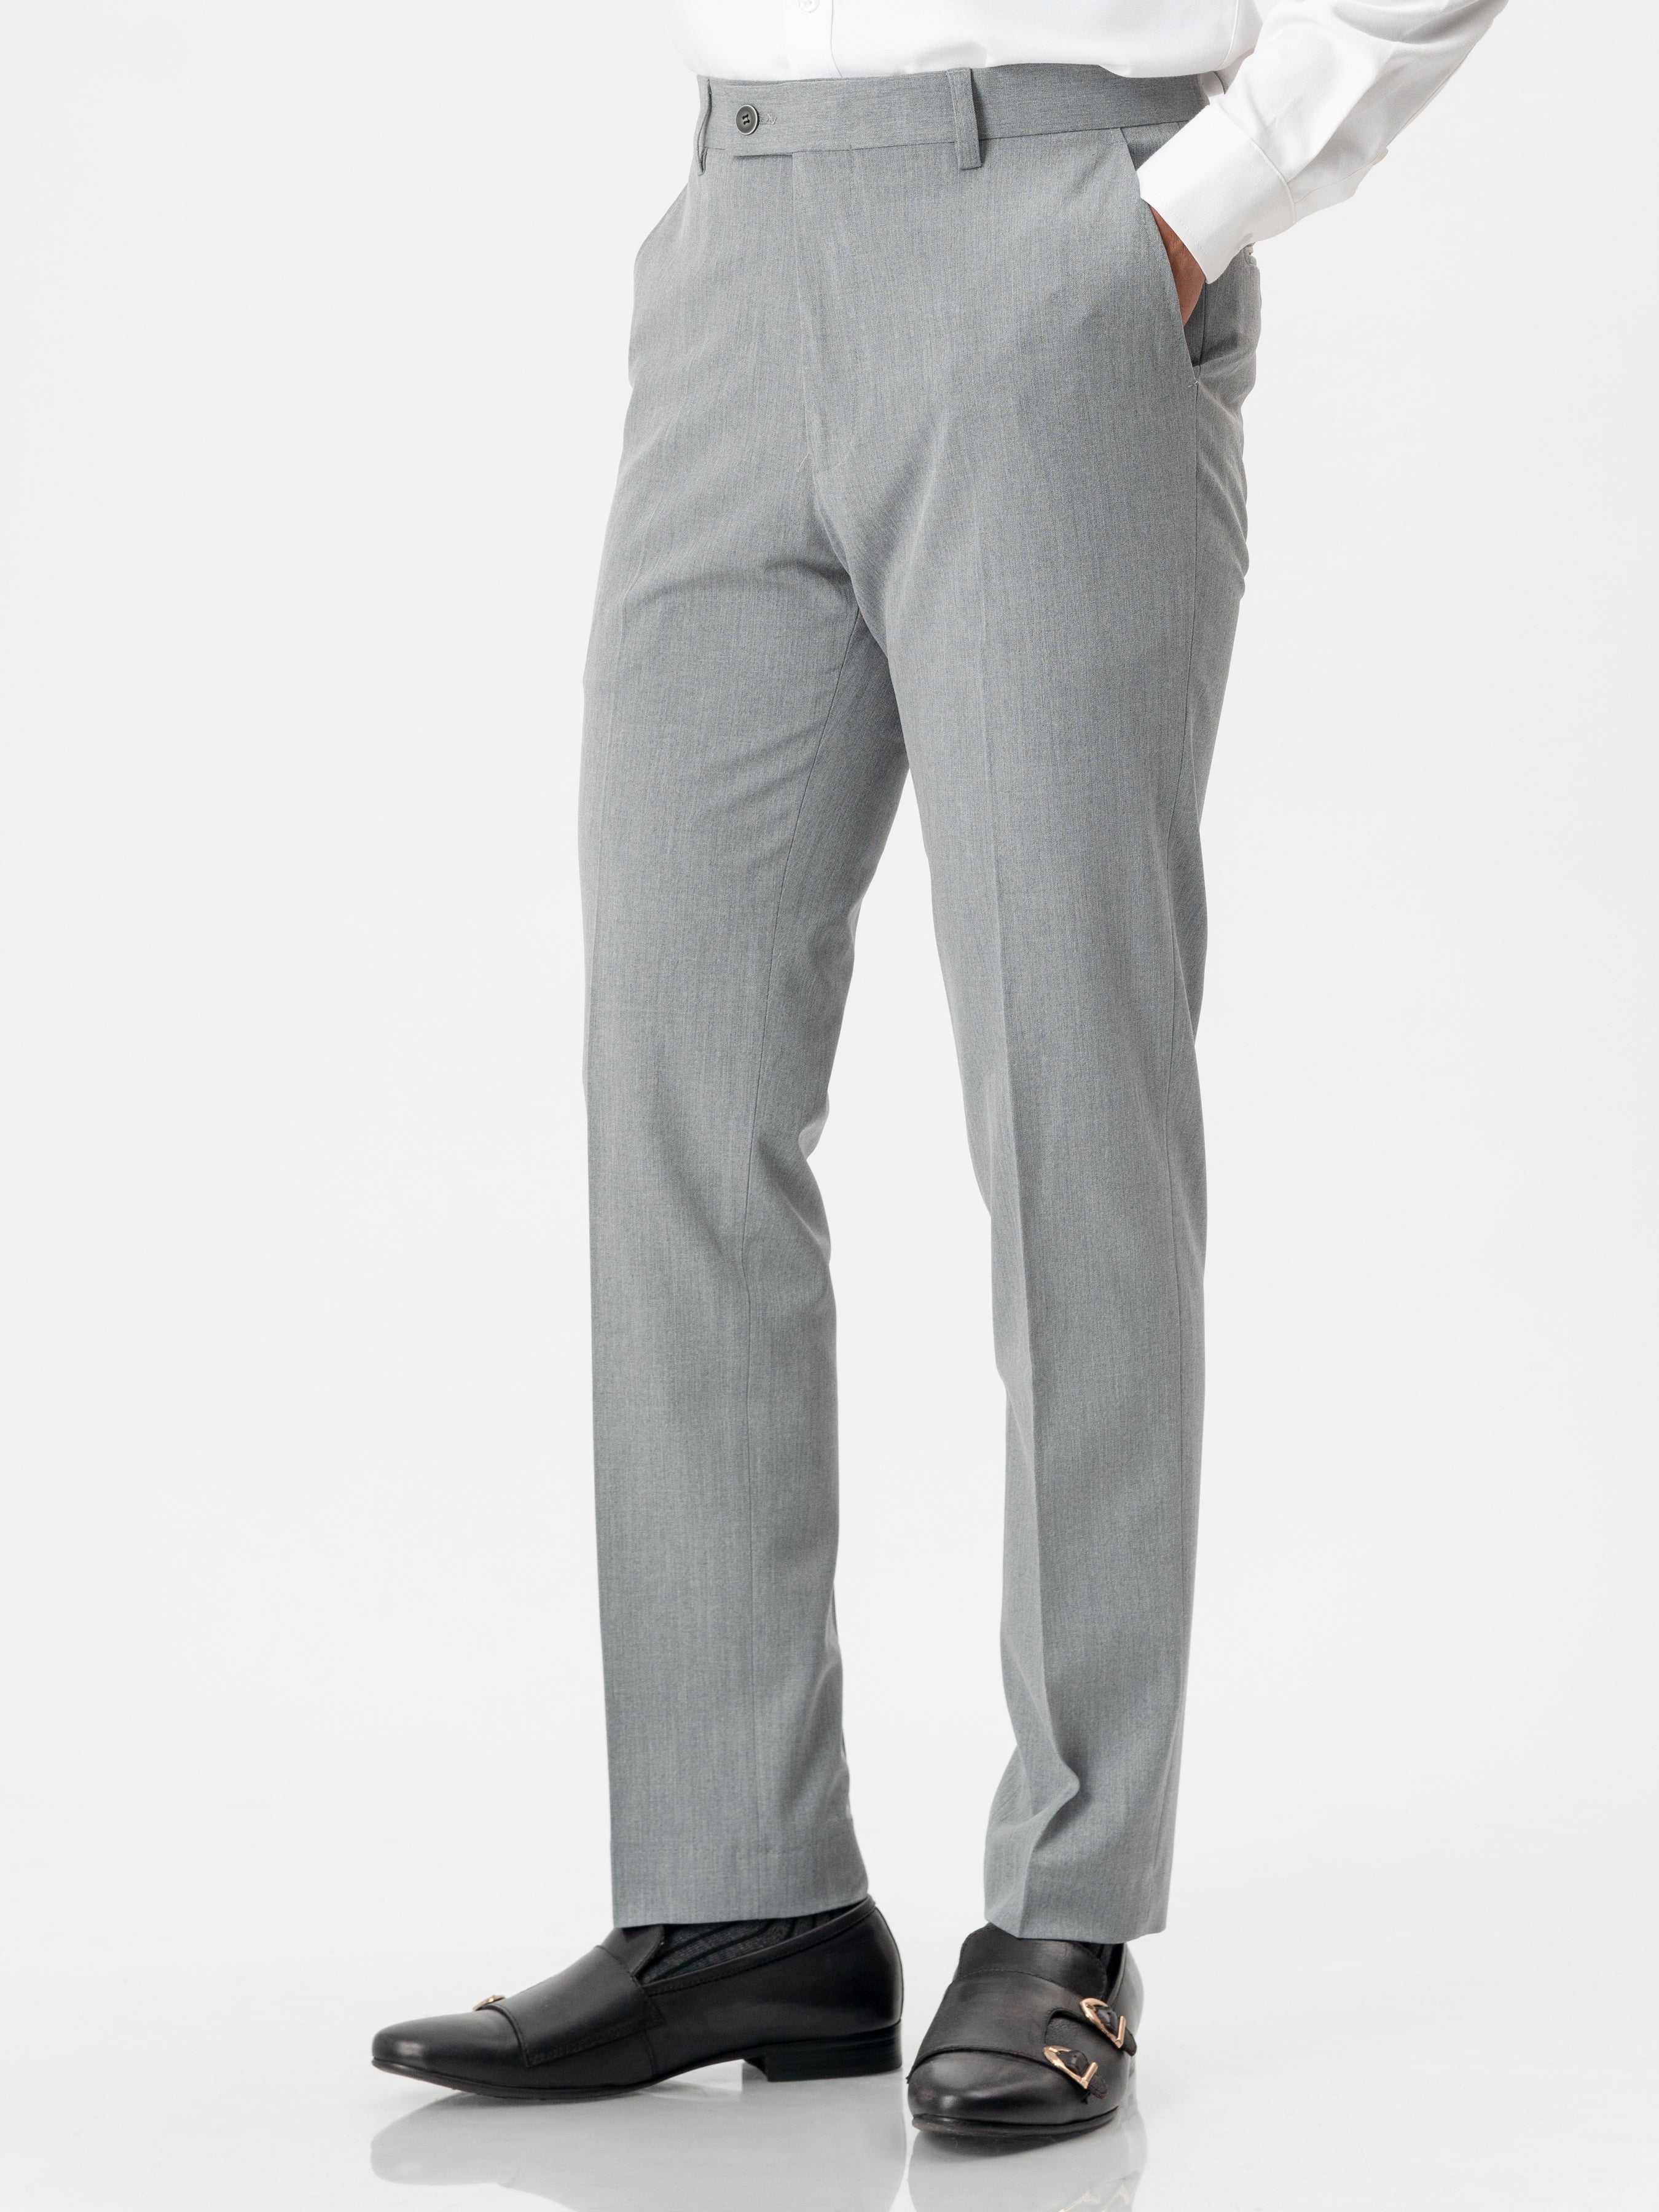 Trousers With Belt Loop - Light Grey (Stretchable)